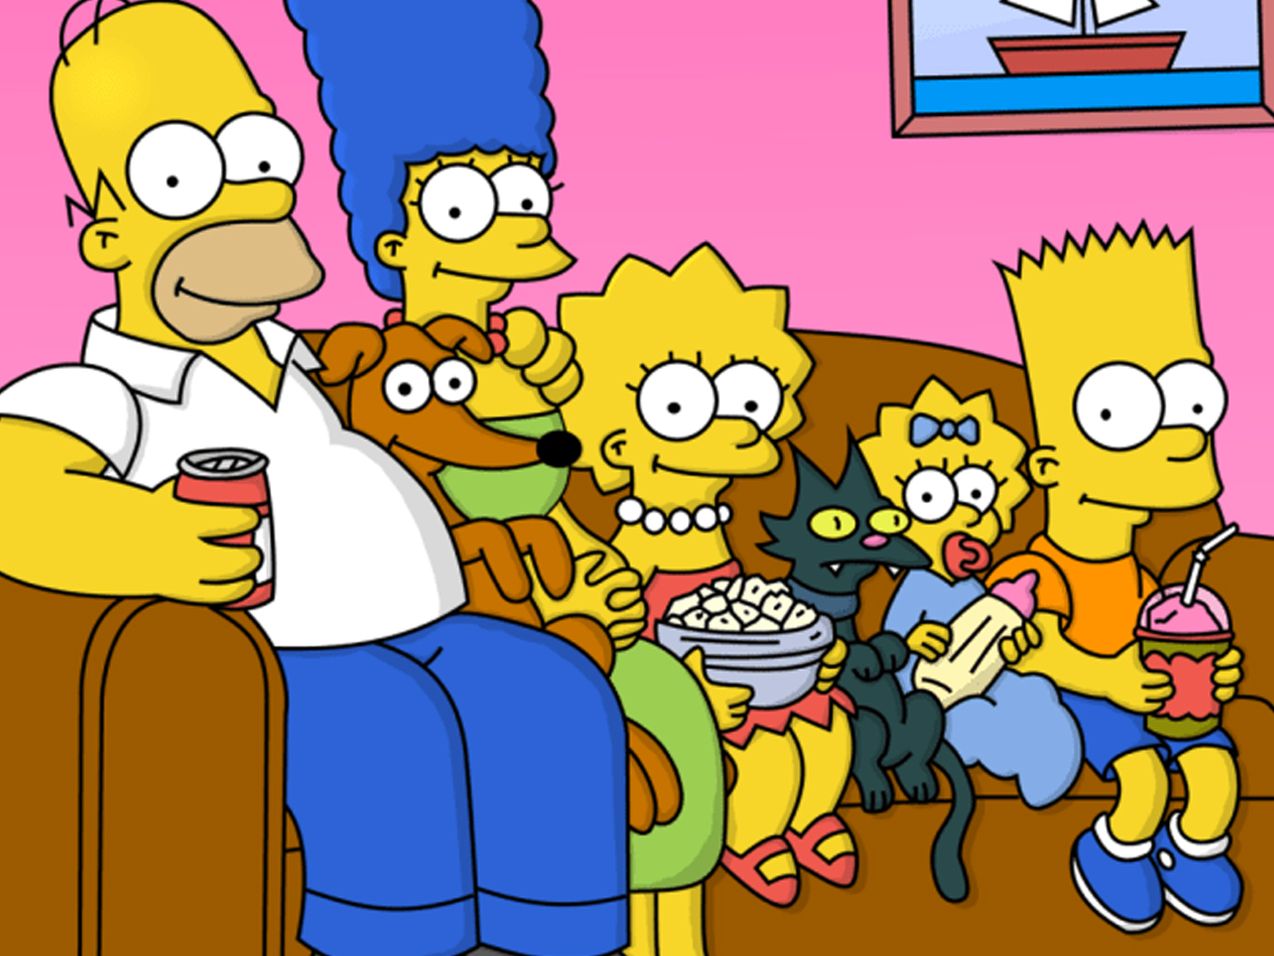 The Simpsons family sit on their couch. 